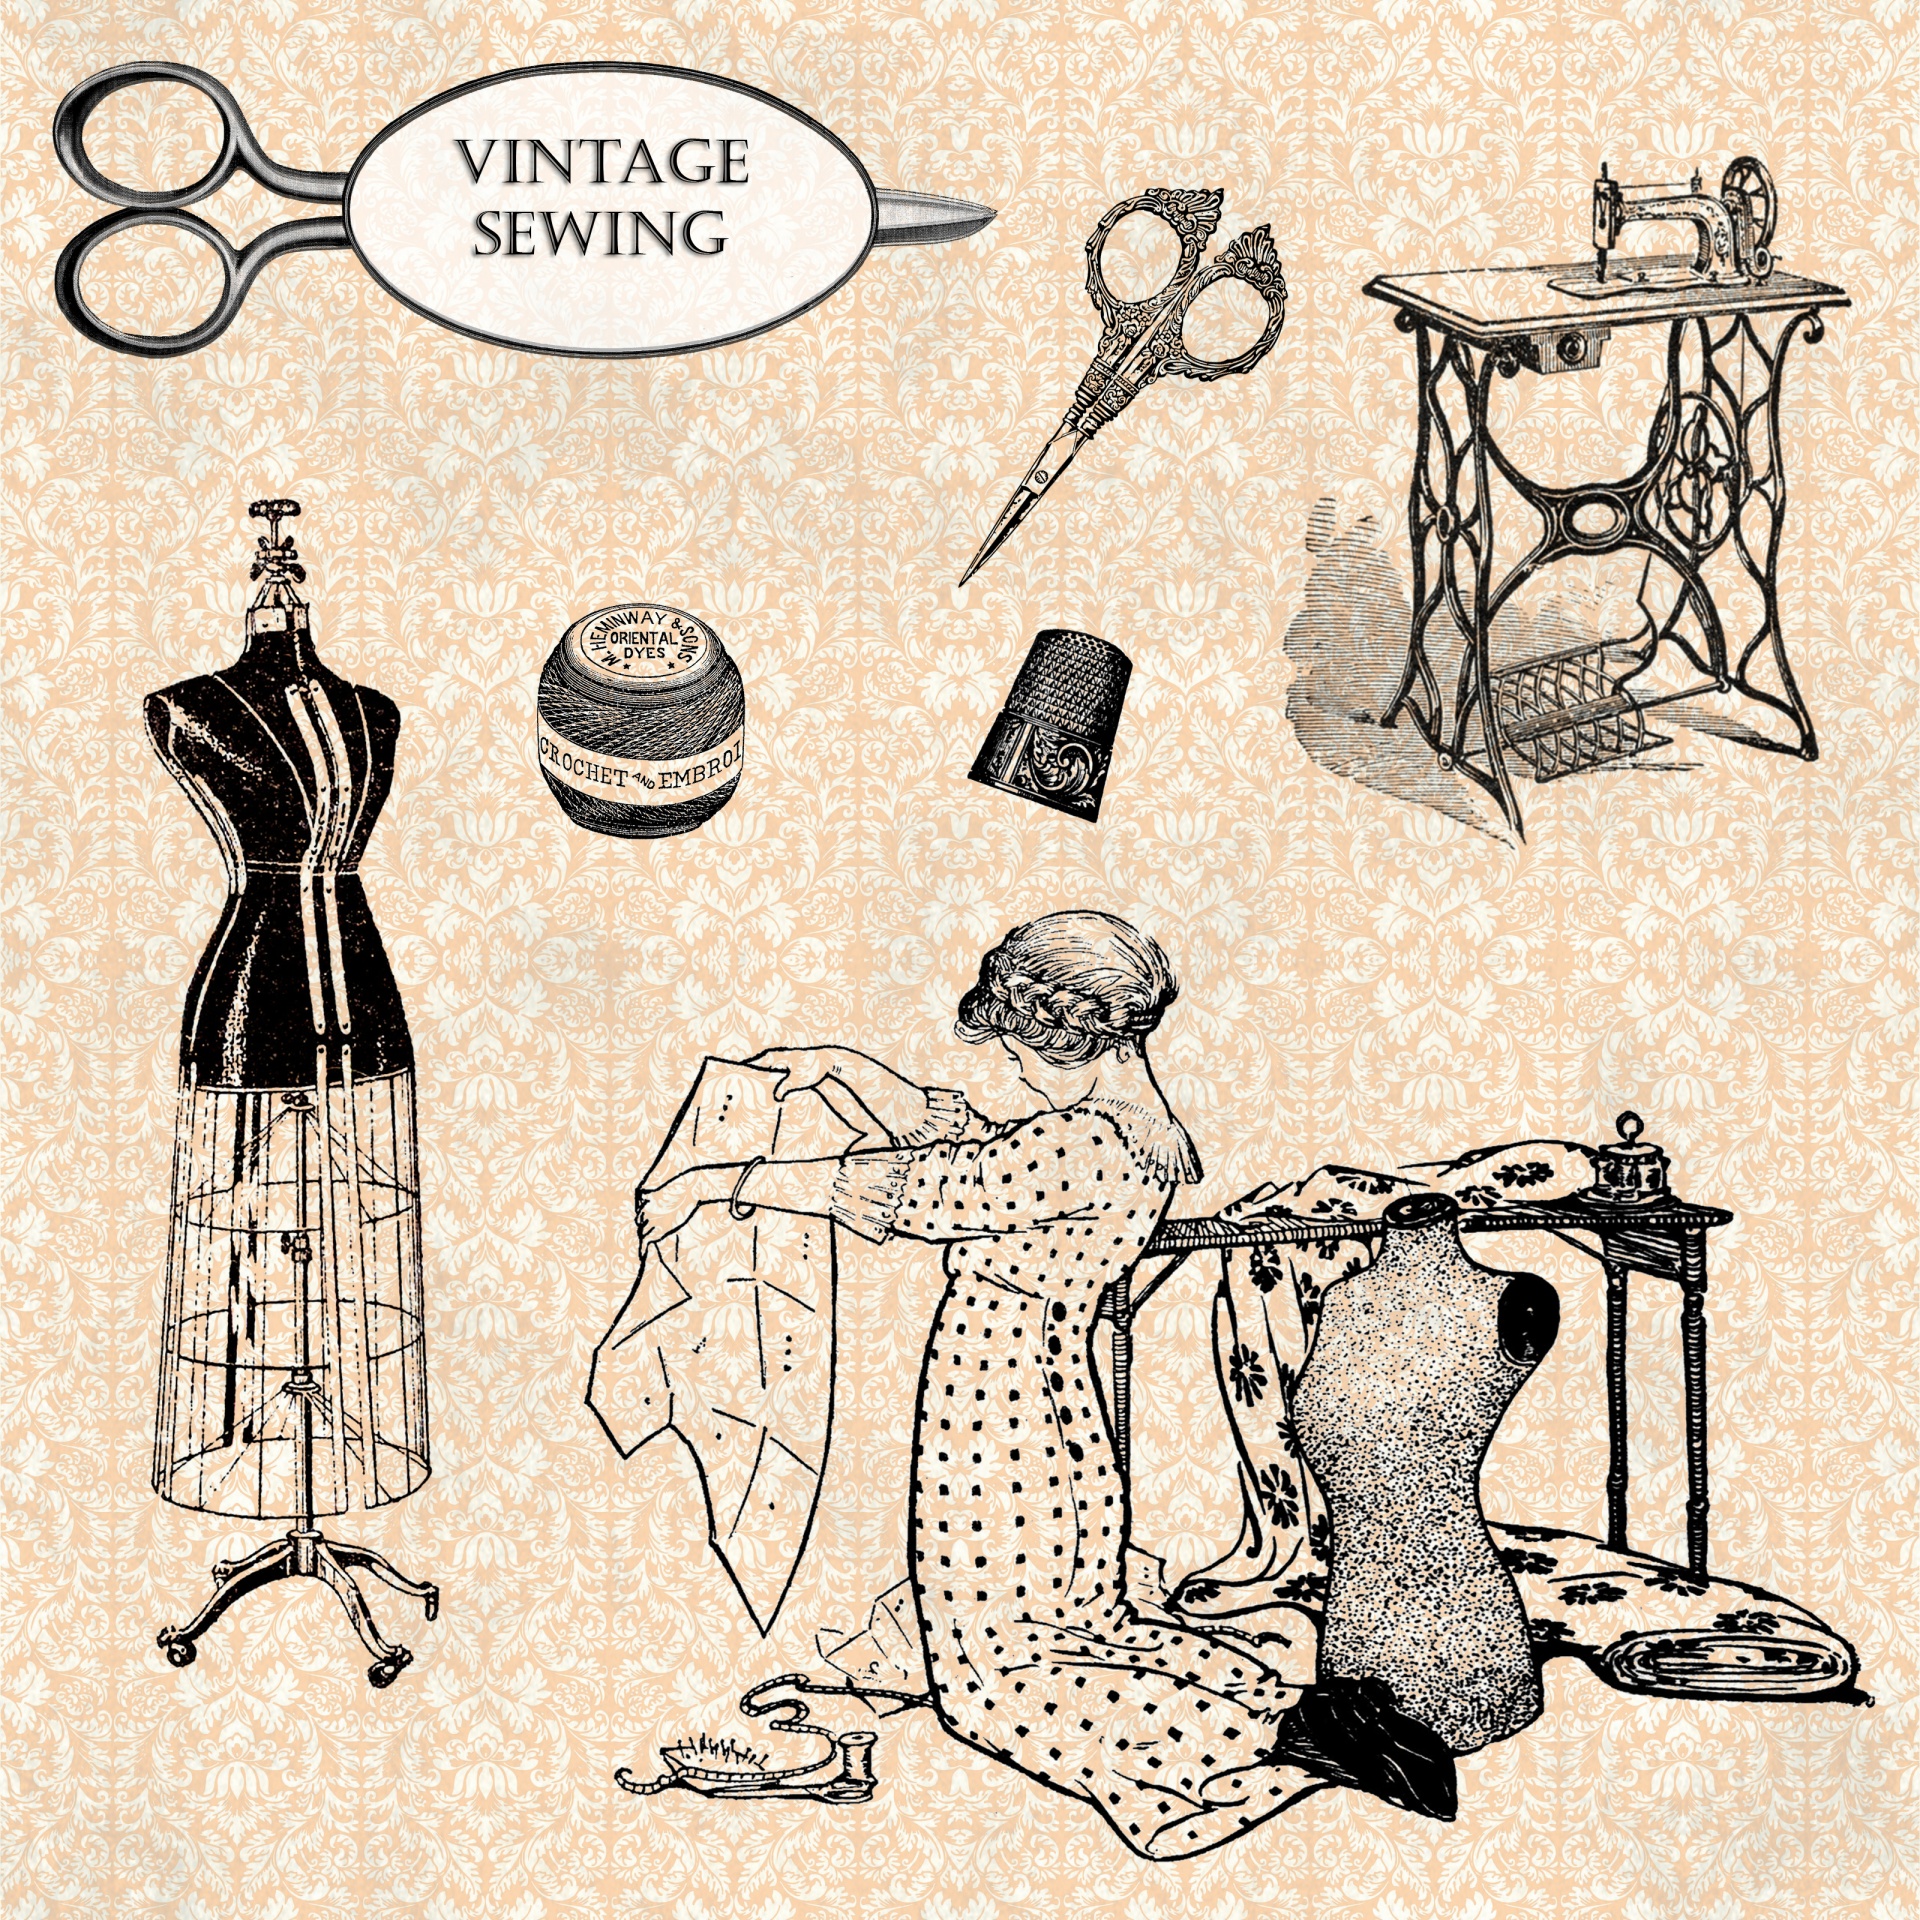 Vintage sewing woman and other elements for scrapbooking